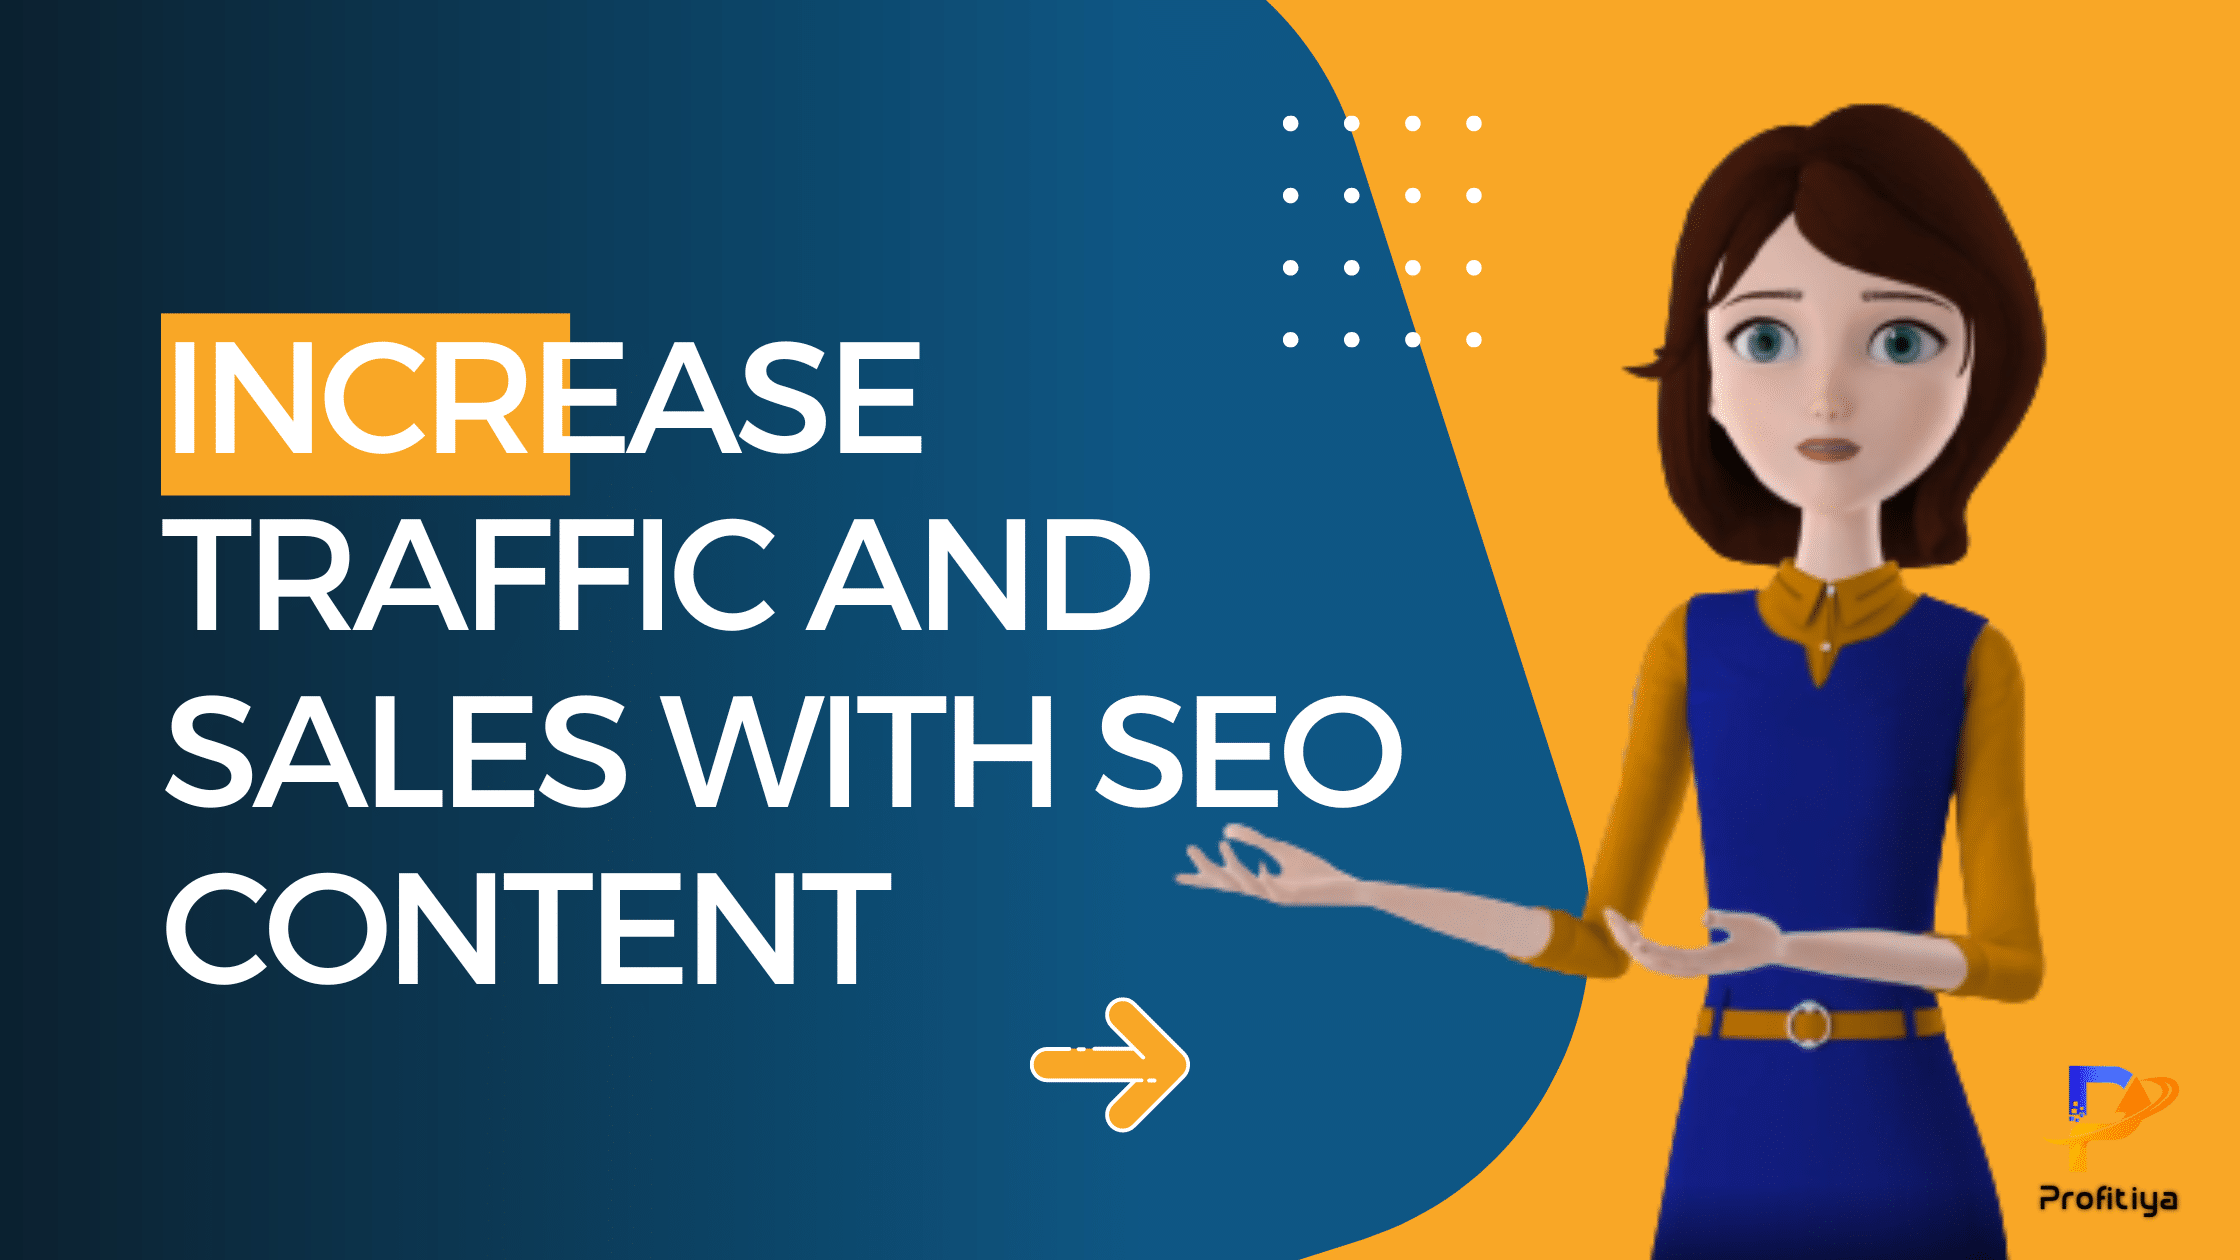 Increase Traffic And Sales With SEO Content